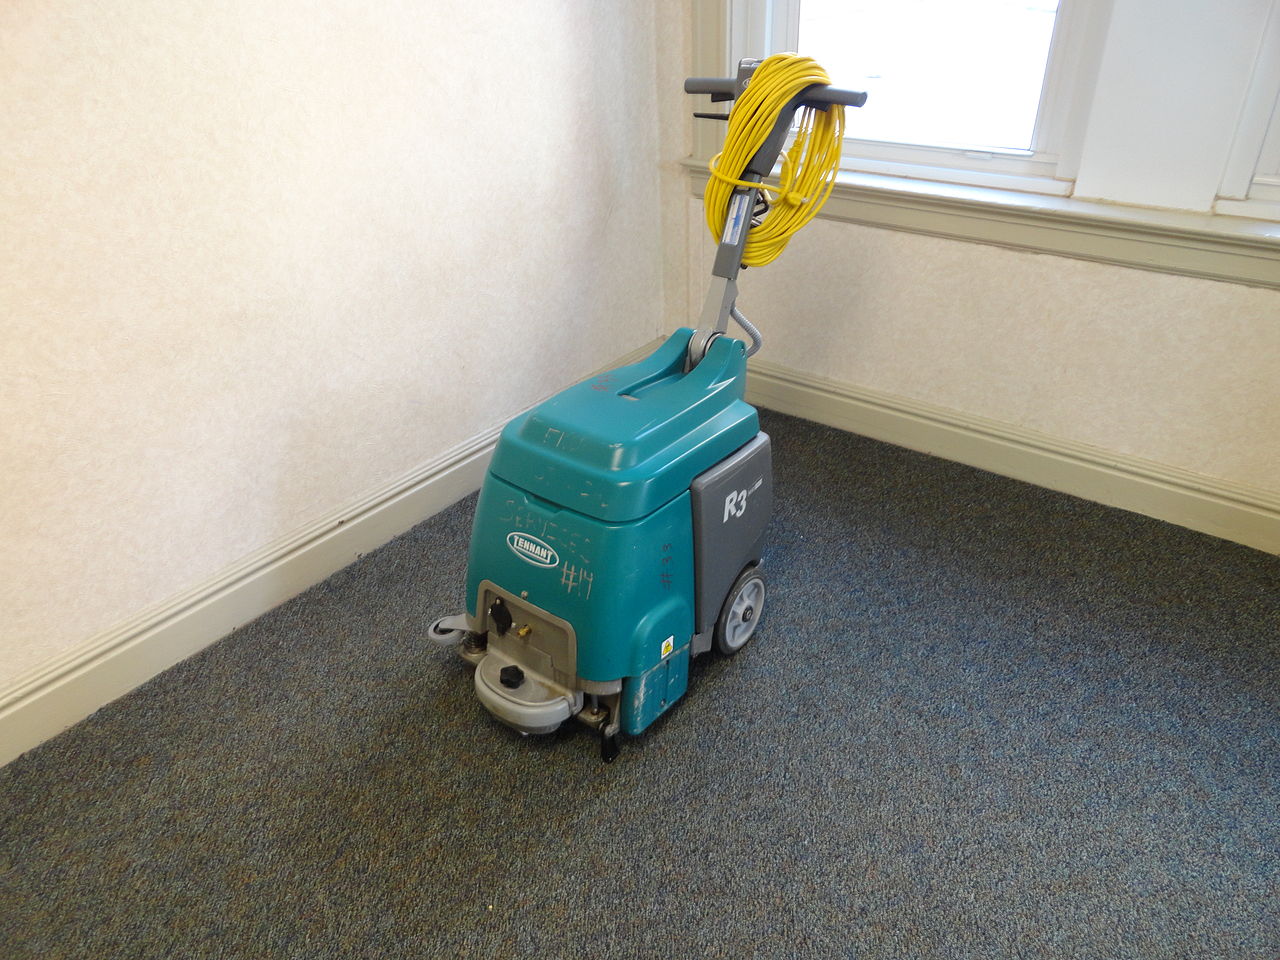 Carpet cleaning machine kept after operation near Bayswater